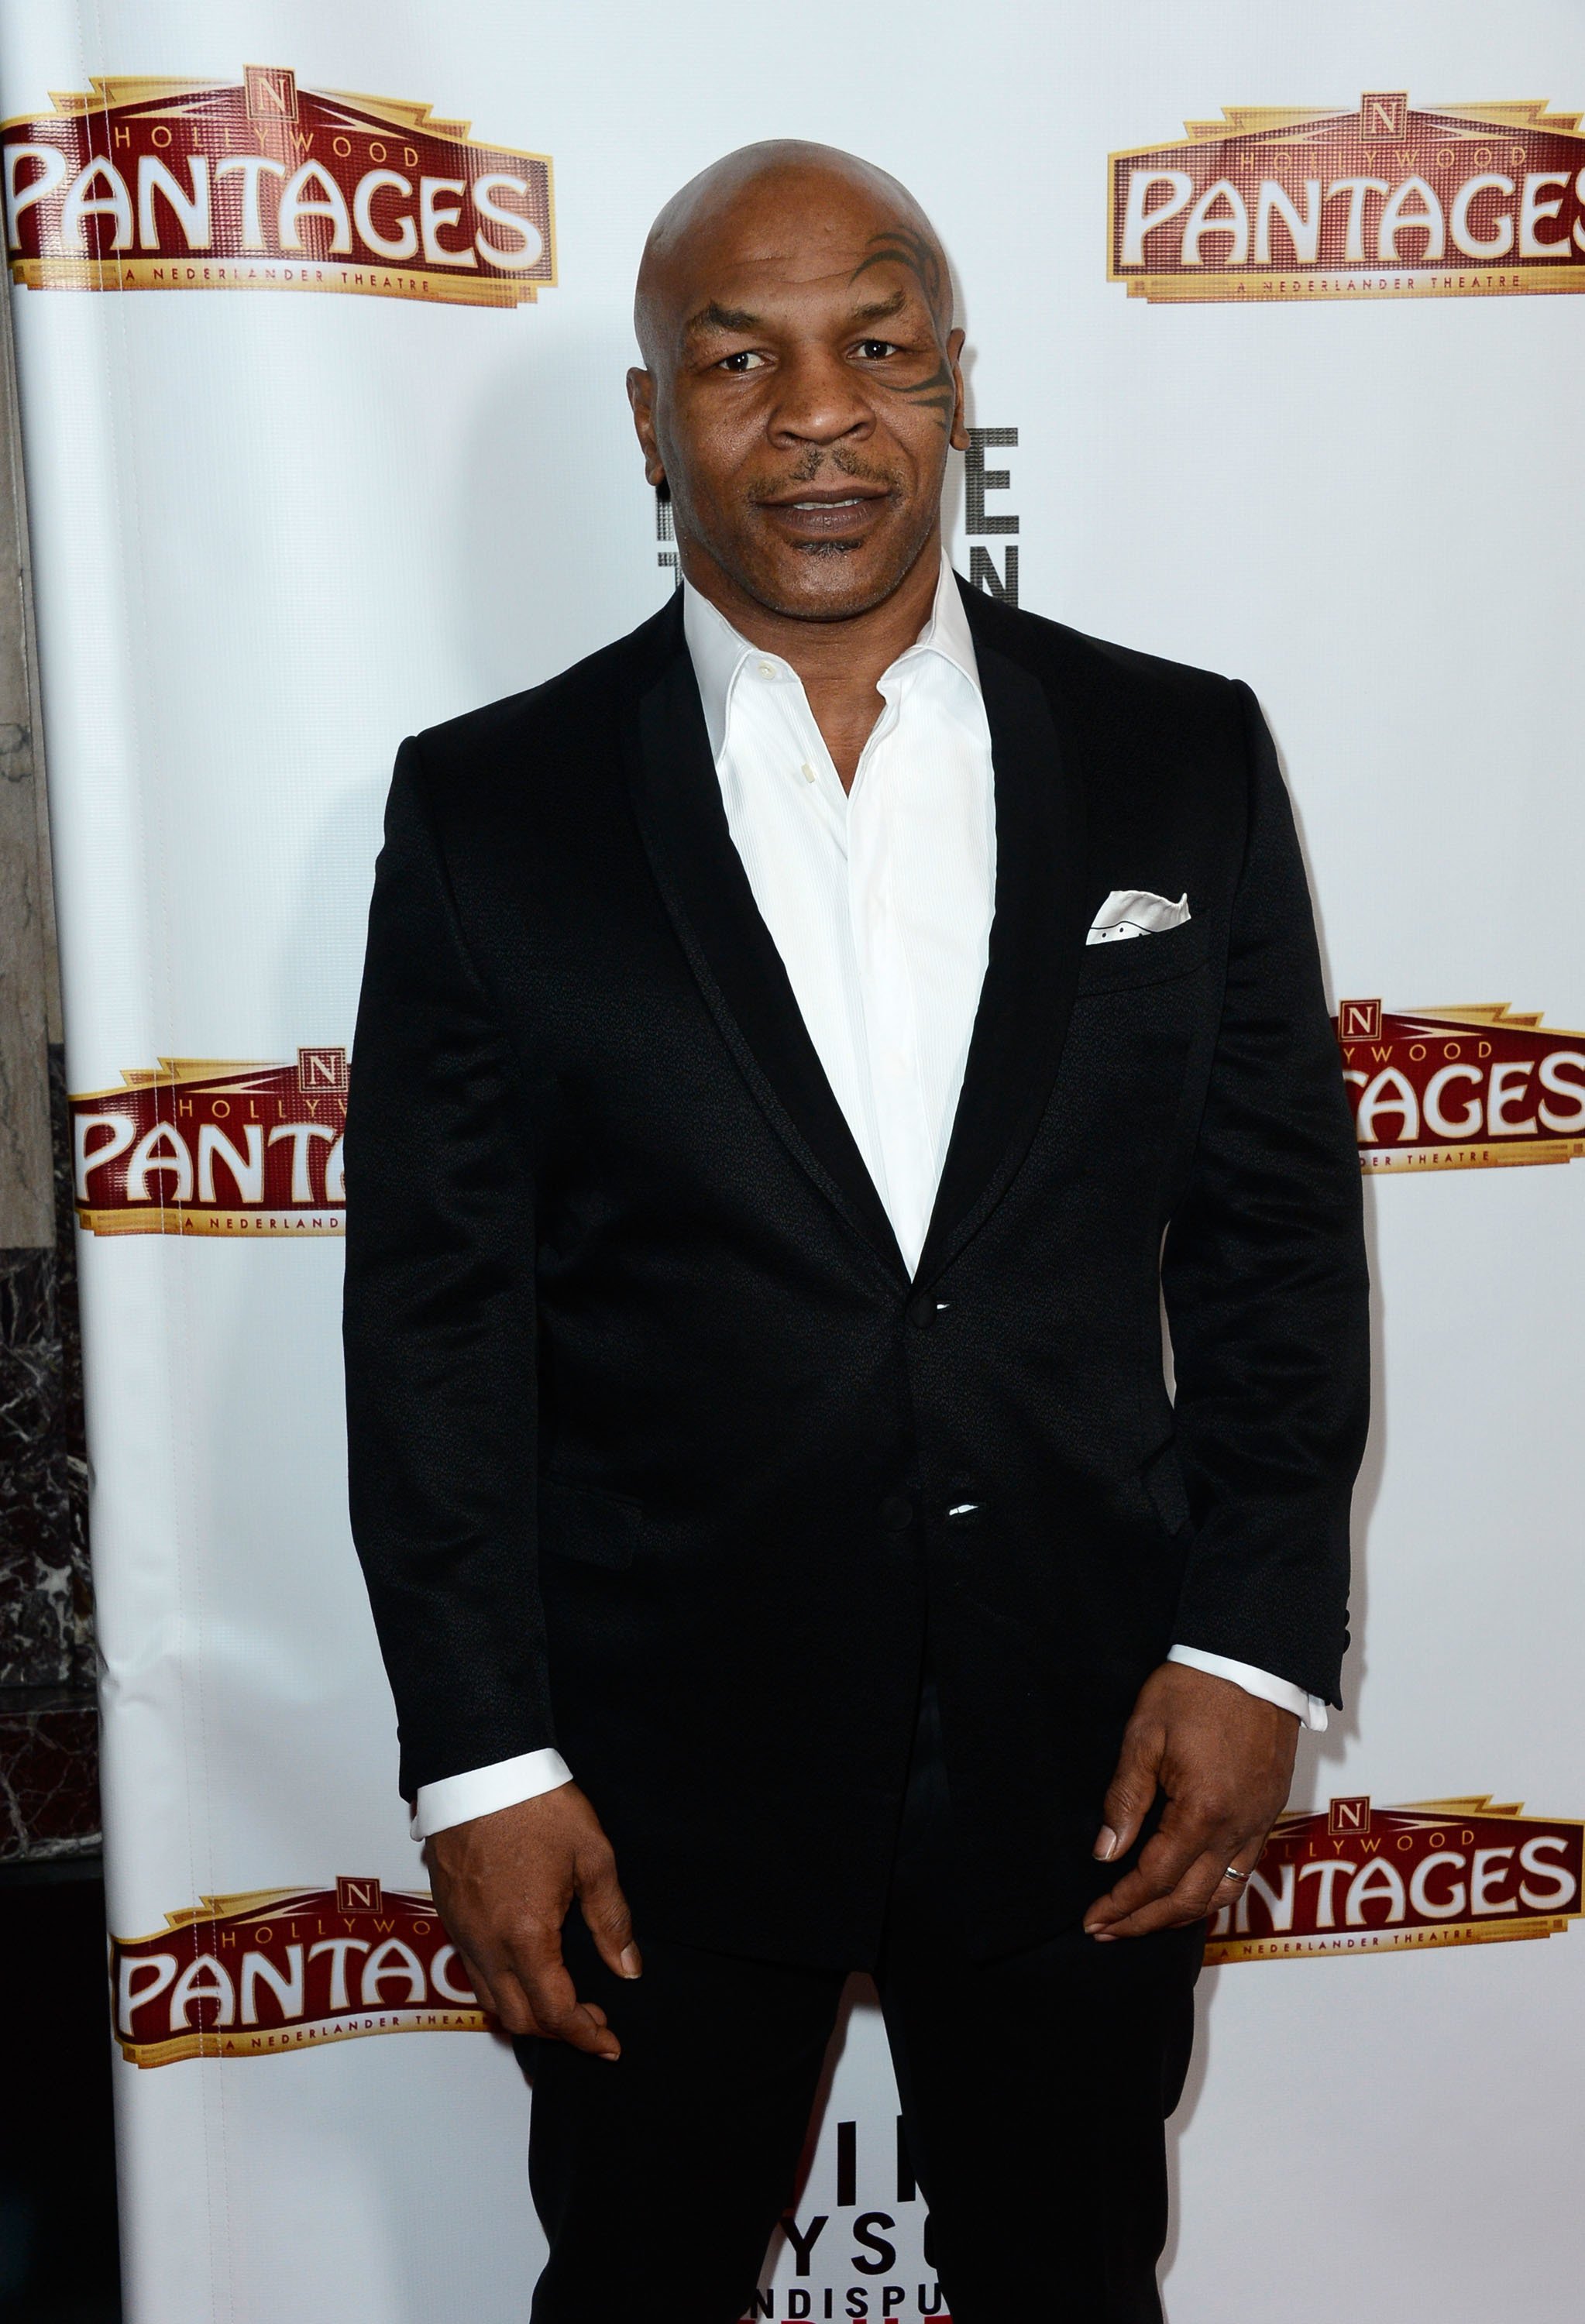 Mike Tyson at the Pantages Theatre on March 8, 2013 | Photo: Getty Images